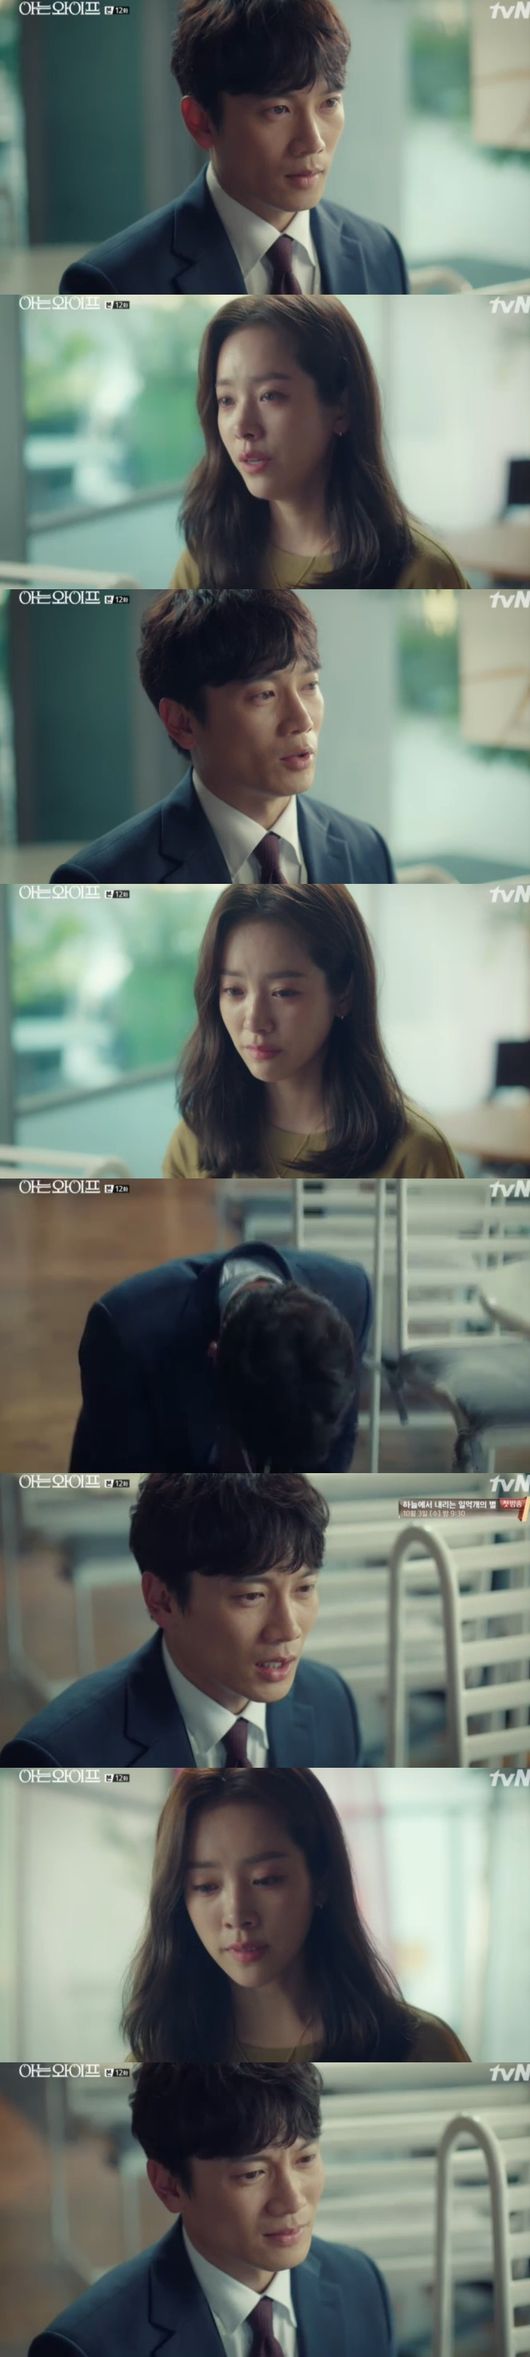 Back in the past, before Han Ji-min and Ji Sung met each other in Knowing Wife, they opened a new Pandora box to rewrite their fate.Woojin (Han Ji-min) and Ju-hyuk (Ji Sung) shared a time slip in the TVN drama Ai is Wife (directed by Lee Sang-yeop, play by Yang Hee-seung) broadcast on the 6th.Woojin was shocked by the sudden and unbelievable confession of Juhyuk.Woojin said, Do you like fantasy movies, do not make up ridiculous stories, he said. If you do not like me, just say no.Joo-hyuk said, Its real, Woojin, and Woojin left, saying, Its ridiculous.Woojin, who came home, asked, Did your mother know from the beginning, so did you say it was a car room? What do you know to your mother?Do not hate the car, but there are many things that the car has done well for us, he said. I am sorry for both of you, and you and you are such a ridiculous relationship.Especially, Woojin was worried about Joohyuk, saying, I will wait and worry a lot, and Woojin continued to care.Woojin has been rethinking it since his first meeting with Joo Hyuk. I was sure he knew everything. Woojin kept crying.The confused Woojin came closer to the truth by matching the words and the circumstances of the past.Woojin and Joohyuk ran toward each other. Then they headed to the cafe.Woojin said, I understand all the strange things that have happened to me, the repeated dreams, the strange actions of my mother and the deputy, the feeling that I was not unfamiliar from the first time I saw it, the things I thought I knew so well, I understand now. Why did my mind respond and move toward it?Woojin asked, But why did you do it? Why did you do such Choices, why did you abandon me?I was so scared that you changed, I had to deal with you for the rest of my life, and I do not know if it is my fault, said Juhyuk. If I had been a little more careful about you, if I had listened to you a little more, I would have been able to live cool and healthy like you now.Soon Joo Hyuk kneeled to Woojin, saying, I was selfish, I did stupid Choices.Its too late, but Im really sorry, Woojin, said Joo Hyuk.Woojin said, It is not your own fault, there is no one-sided relationship. I am not a Wujin that you abandoned. I will overcome the waves without being so weak, I will give you the opportunity again. I will give you the opportunity.Ju-hyeok tried to give up, saying, No, its greedy, no, its too shameless.But soon I thought about my happy love days with Woojin and ran to Woojins house as if I was determined to say, Do you really do it, do you want to do it once more, I can greed once more?Woojin came out in front of the house, and Joo Hyuk asked for a date from the beginning, saying, What are you doing on the weekend?Woojin was the flower maker, and Joo Hyuk headed to the Woojin house to avoid the stagnant section. When Joo Hyuk could not keep an eye on Woojins beauty, Woojin said, Why did you throw it away?I asked what title I used to use. Juk Hyuk smiled, saying, Sam? I was called Yara when I got married. Woojin asked where he was going, and Juhyuk asked him to go to the place where he first dated.Woojin said, I remember my agent, but I do not remember. He said, Its okay, I can make memories again.At this time, a call came to Ju-hyeok: World Bank.6 billion loan accidents, and a mischievous incident at World Bank. Woojin comforted the anxious Joo Hyuk. Everyone was nervous, and the head office contacted me.The manager was cut for three months, and Ju-hyeok was dismissed. Ju-hyeok sat down on the floor.That night, the sky was uncanny. The news of a black hole. The next day, Woojin went to the supermarket and accidentally ran into a homeless man.They looked back at each other, and soon they saw the eye-catching eye. Joo Hyuk went to a homeless man who was tilting a glass in the area.I do not know what kind of child I am anymore, he said. I am unhappy with the bad guy, the person who is involved with me.The homeless man said, There is still a chance, an opportunity to turn everything back.However, Juhyuk said, I do not want to be a fool anymore, and I am so afraid.The homeless person asked again, Do you regret it? And Juhyuk said, Did you regret it? The homeless person replied with a smile.Woojin searched for Joo Hyuk, who was not contacted, and he was sitting alone on the beach, and he heard Woojins recording message worrying about him and only touched the phone.The black moon rose above his head, and Woojin had a hunch that he would be on the beach, and when he was about to leave the house, Woojin called out.Woojin said he had to go, and he said, I know, I have to go. He said, I take this, I think I need you more than me.Everyone has a moment to turn around, I do not guarantee that it will be what I want, but I do not have many opportunities. Woojin was shocked, saying, Do you, then, your mother?Go, theres no time, he replied, and finally hugged Woojin, looking at the family photos and saying, Honey, did I do well?I could have saved you even if I was a little quick at the time, but I am smarter than Woojin, so I can change it as I want. When Woojin arrived at the beach, Juhyeok was heading for the sea.Woojin said, Why do you make people so hard? And Joo Hyuk said, In the end, I made you hard again. You get hard next to me, maybe you get unhappy as before, run away from me when you can.When Woojin laughed the brightest, he was not next to him. I am so sorry for you, the shadow of misfortune, I am so sorry, he said.Woojin said, I do not like it, I will not go alone, I will not come here, I will overcome it together. If so, I will go back and change our destiny again, and opportunities are not often.Woojin tossed a five-hundred-won coin into Tollgate, and then he followed Ju-hyeok, who went into a car with a second when Toll gate was about to close.Joo Hyuk and Woojin ran out into the darkness, looking at each other running from the side.Finally back in 2006: Han Ji-min was also back in 2006 as a girl, and was appalled to see herself back in the past.Then, screaming big hit and unable to take his eyes off the calendar, he returned to past and opened the Pandora box of fate.Now, the audience has doubled their curiosity about what the future of the two people who will draw the fate of together will be.Capture the broadcast screen of Knowing Wife